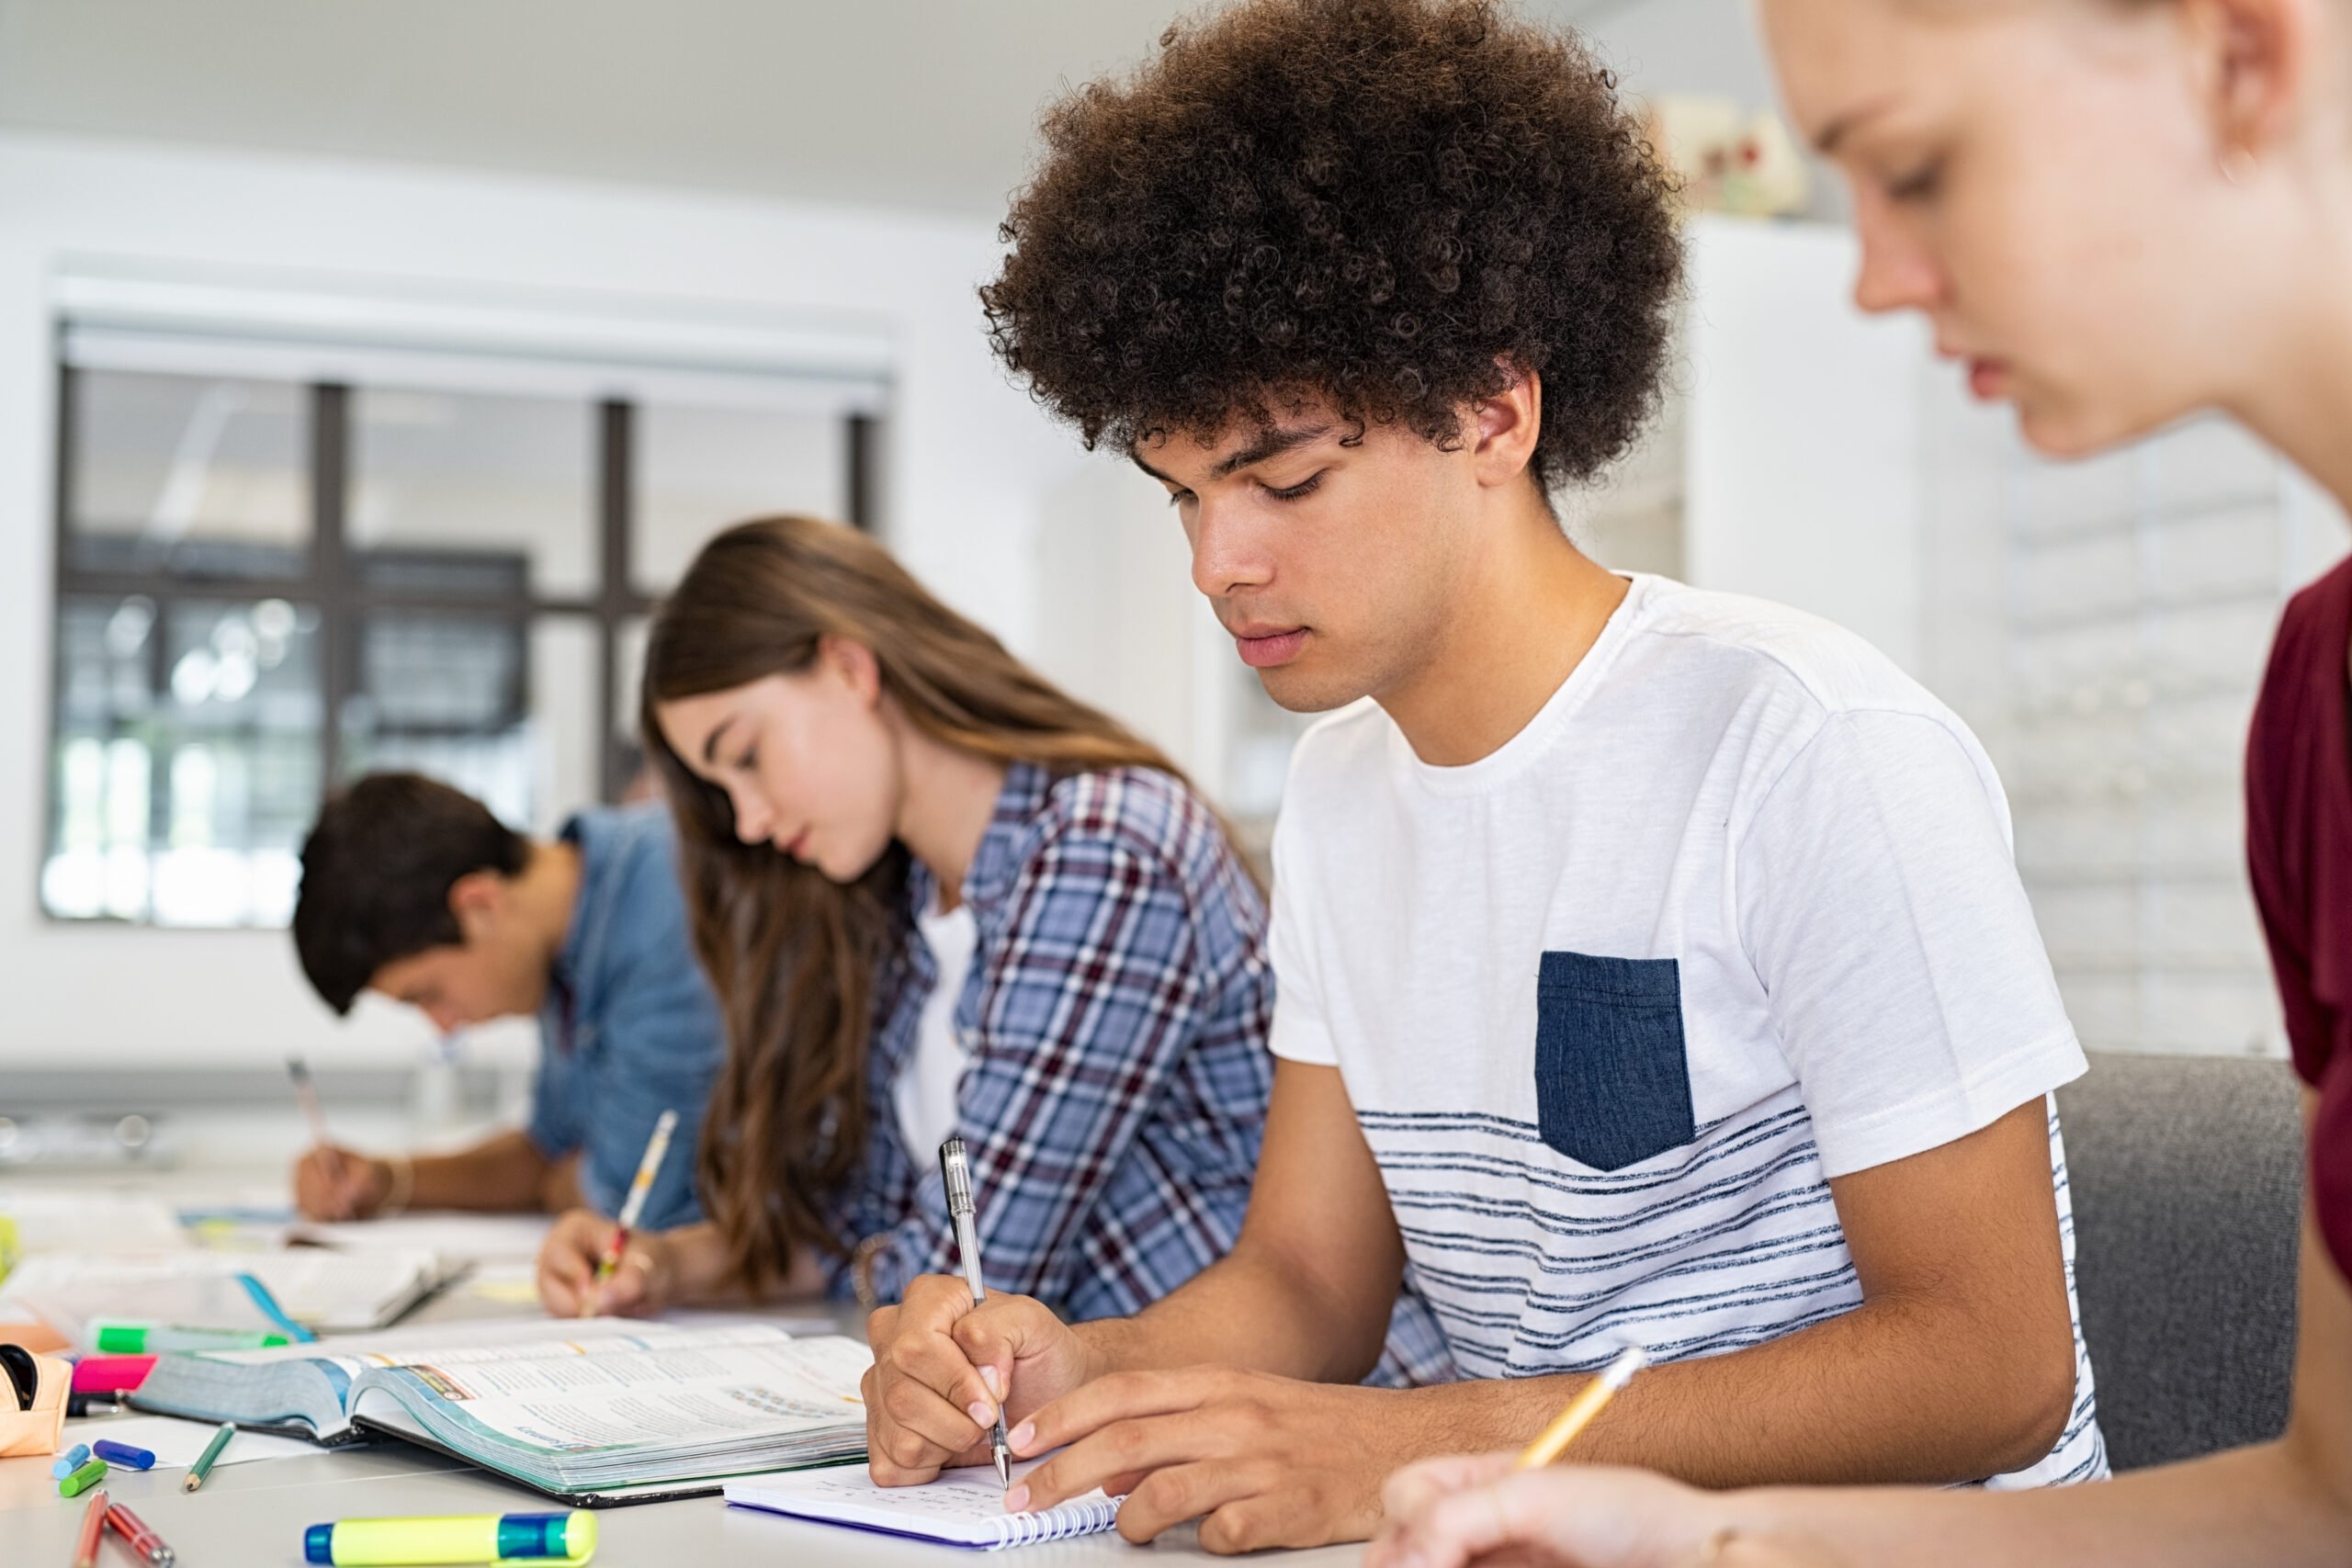 Concentrated young man studying in classroom with friends sitting in a row. College student concentrating on studies while taking notes in university library. African american high school guy preparing exam with classmates in class.